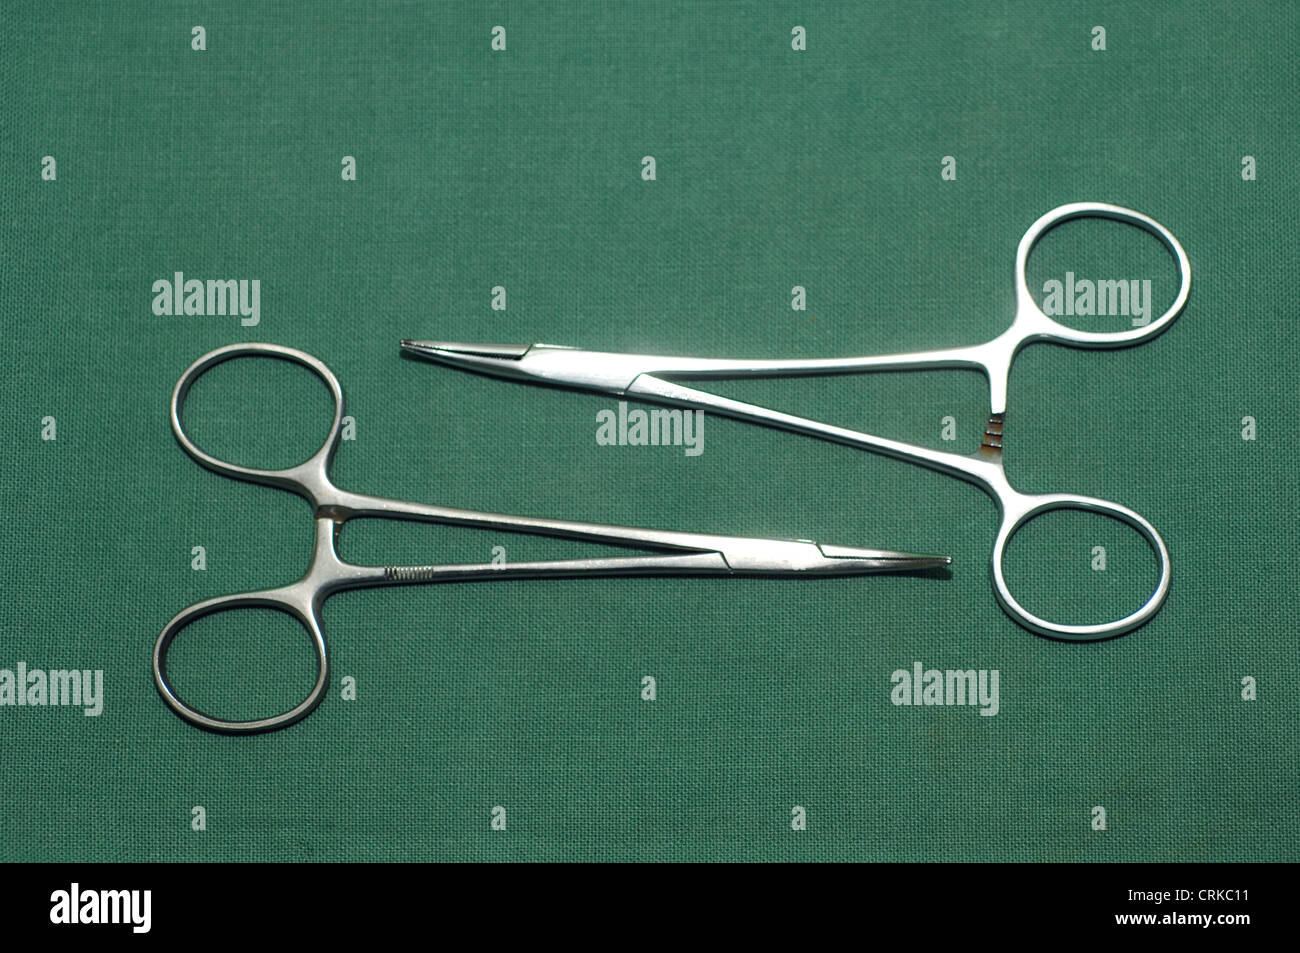 Artery forceps for grasping and compressing an artery. Stock Photo